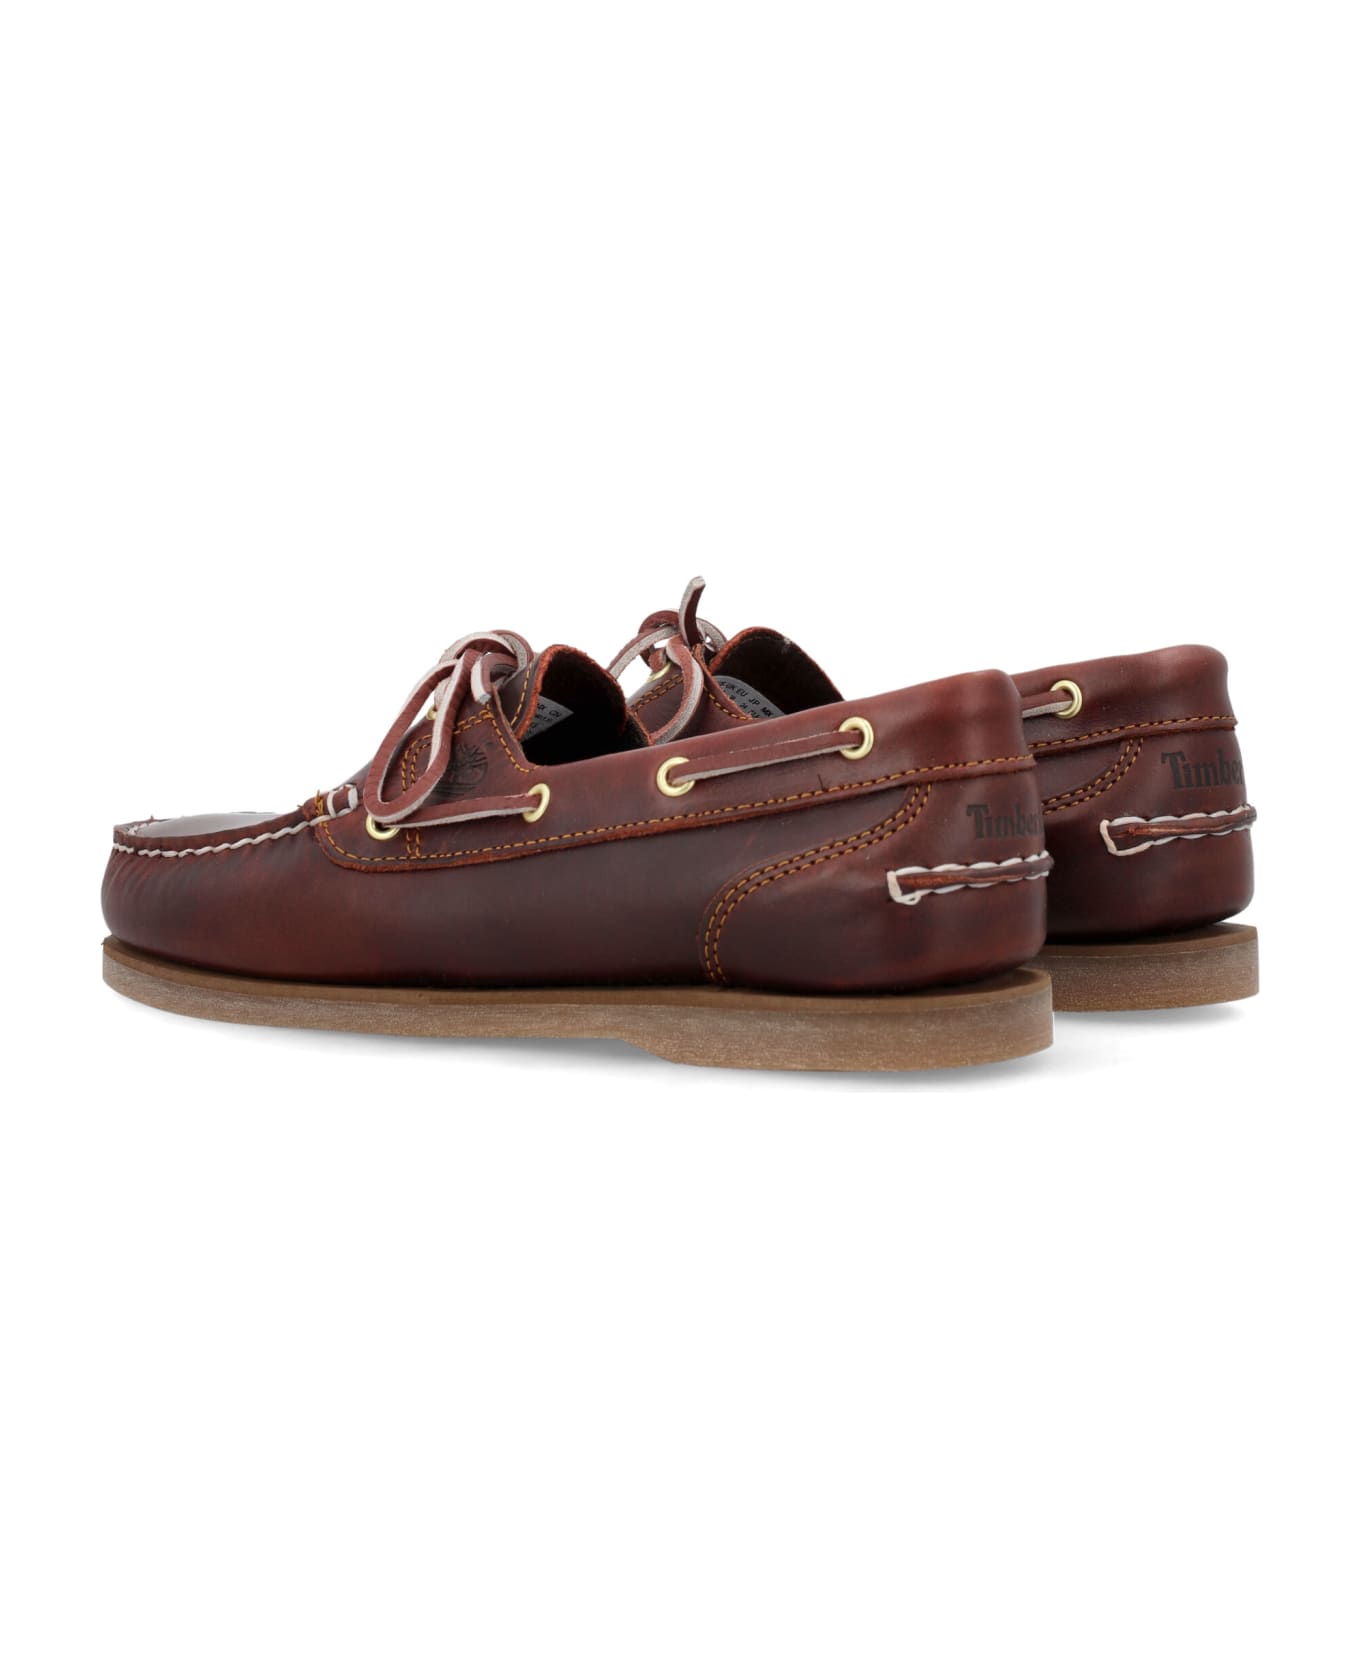 Timberland Classic Boat Shoe - MID BROWN フラットシューズ